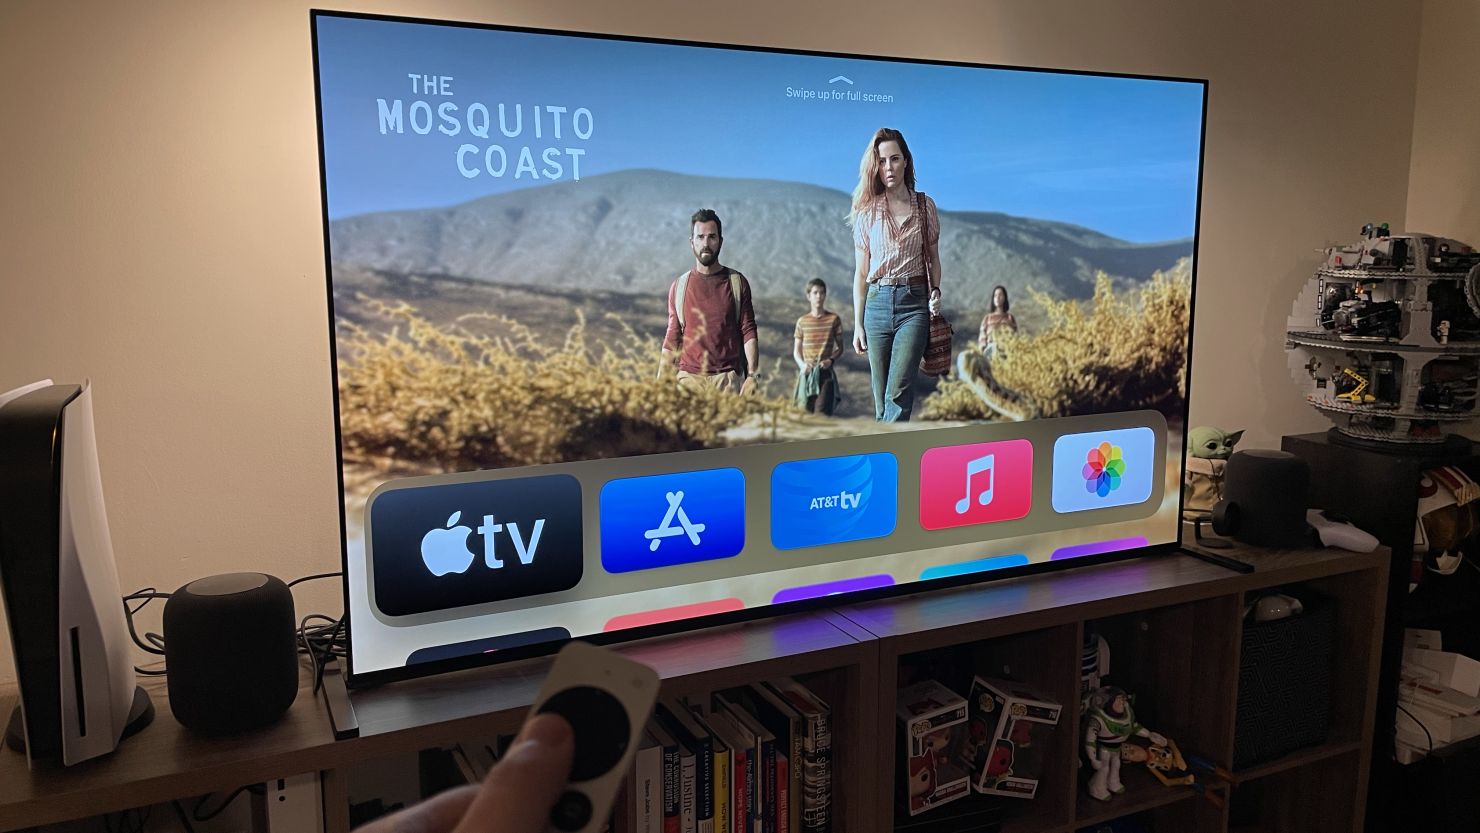 List of Apps That Support Apple TV Universal Search Continues to Grow